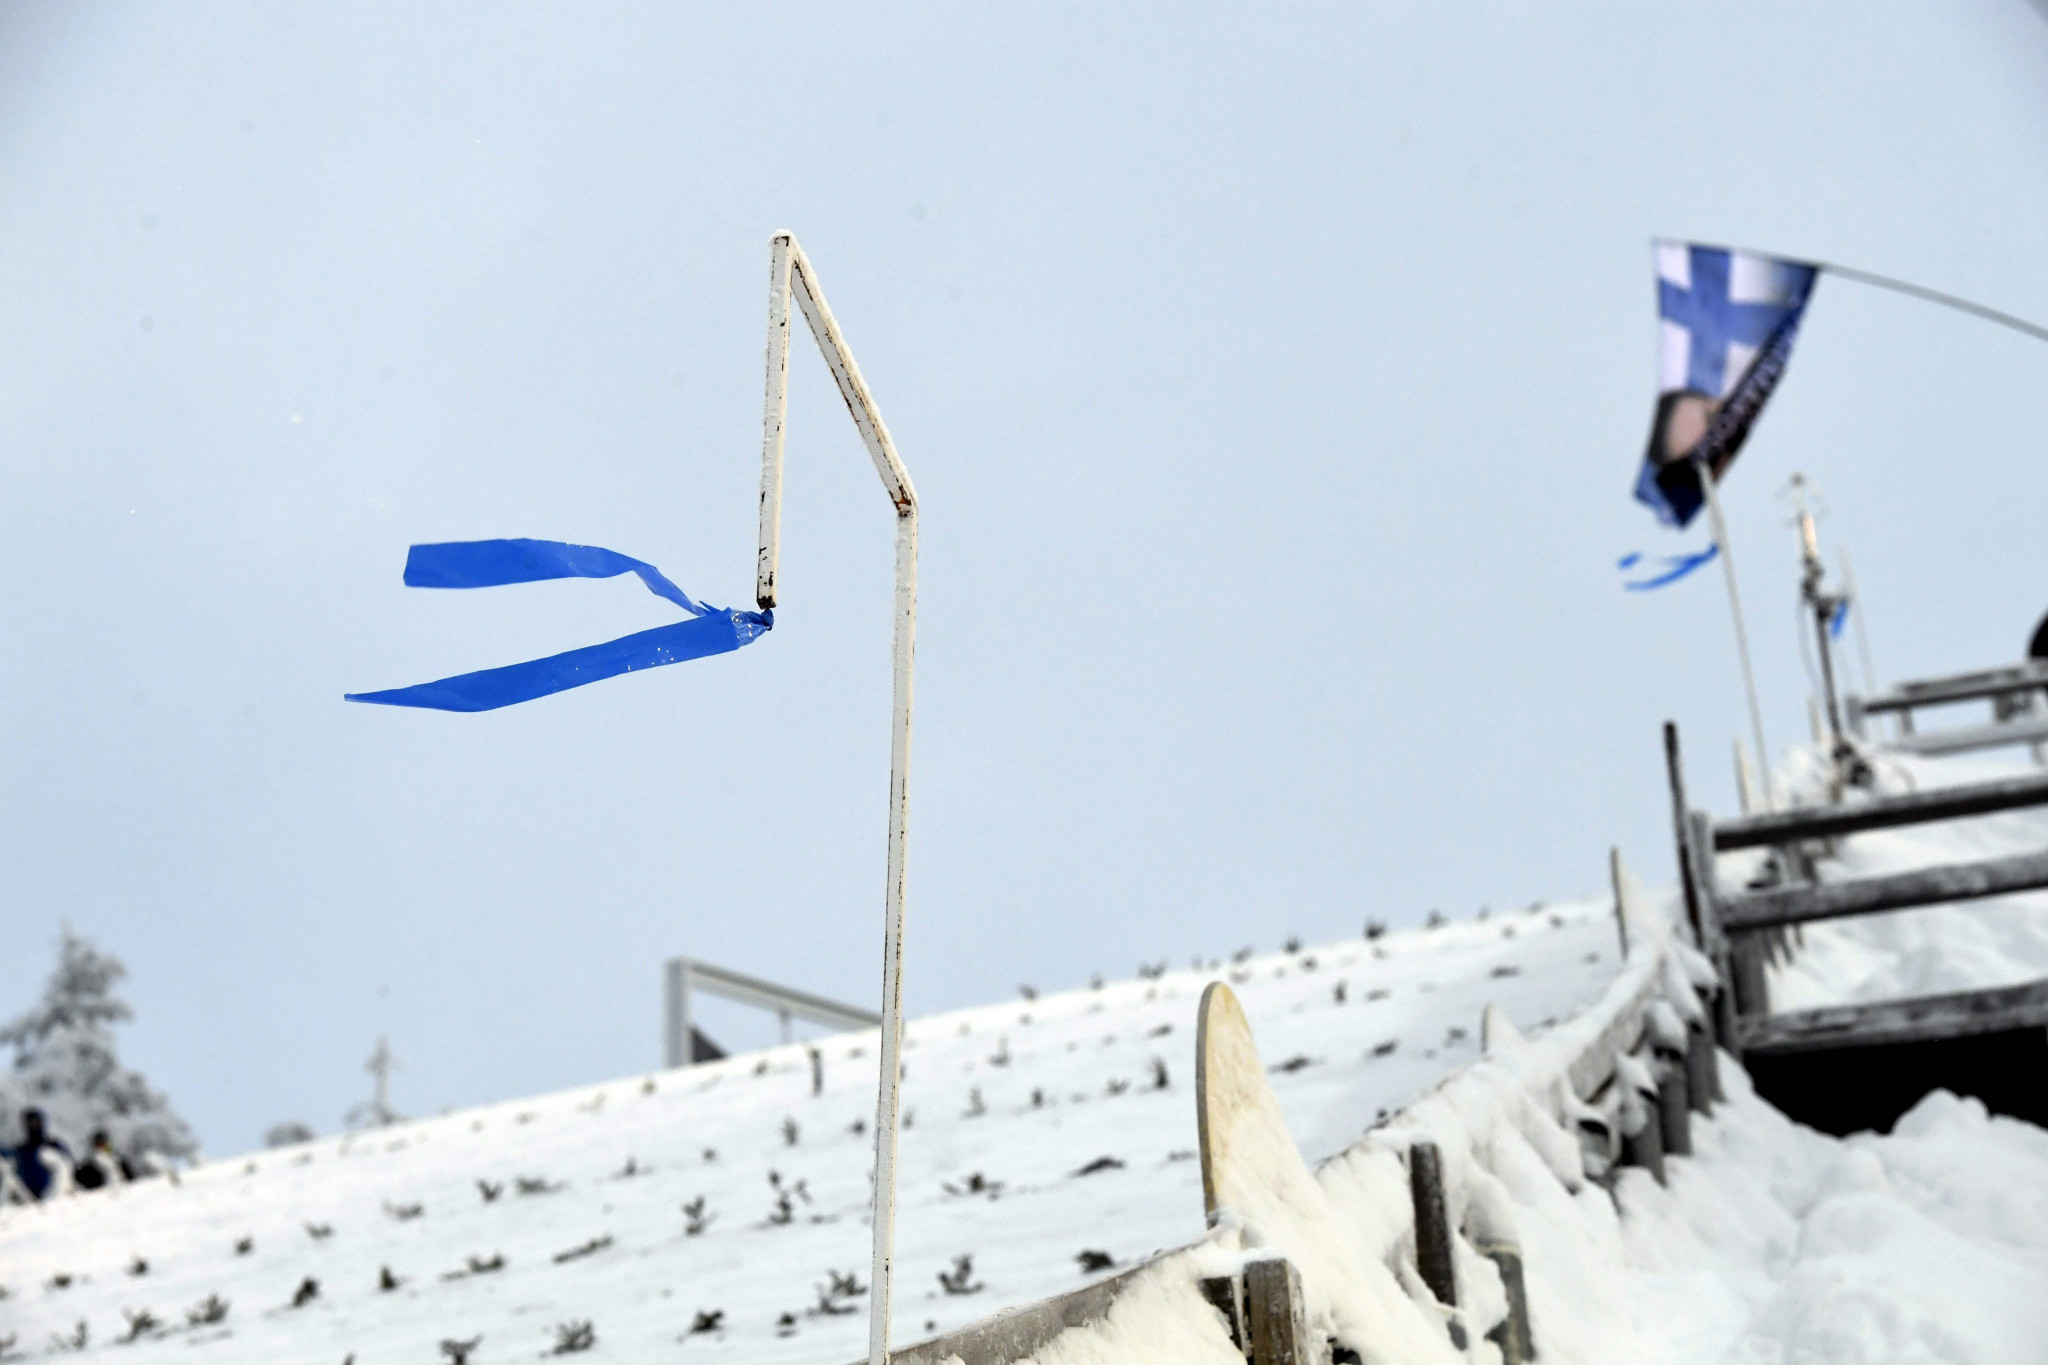 Wind conditions force cancellation of second FIS Ski Jumping World Cup event in Ruka